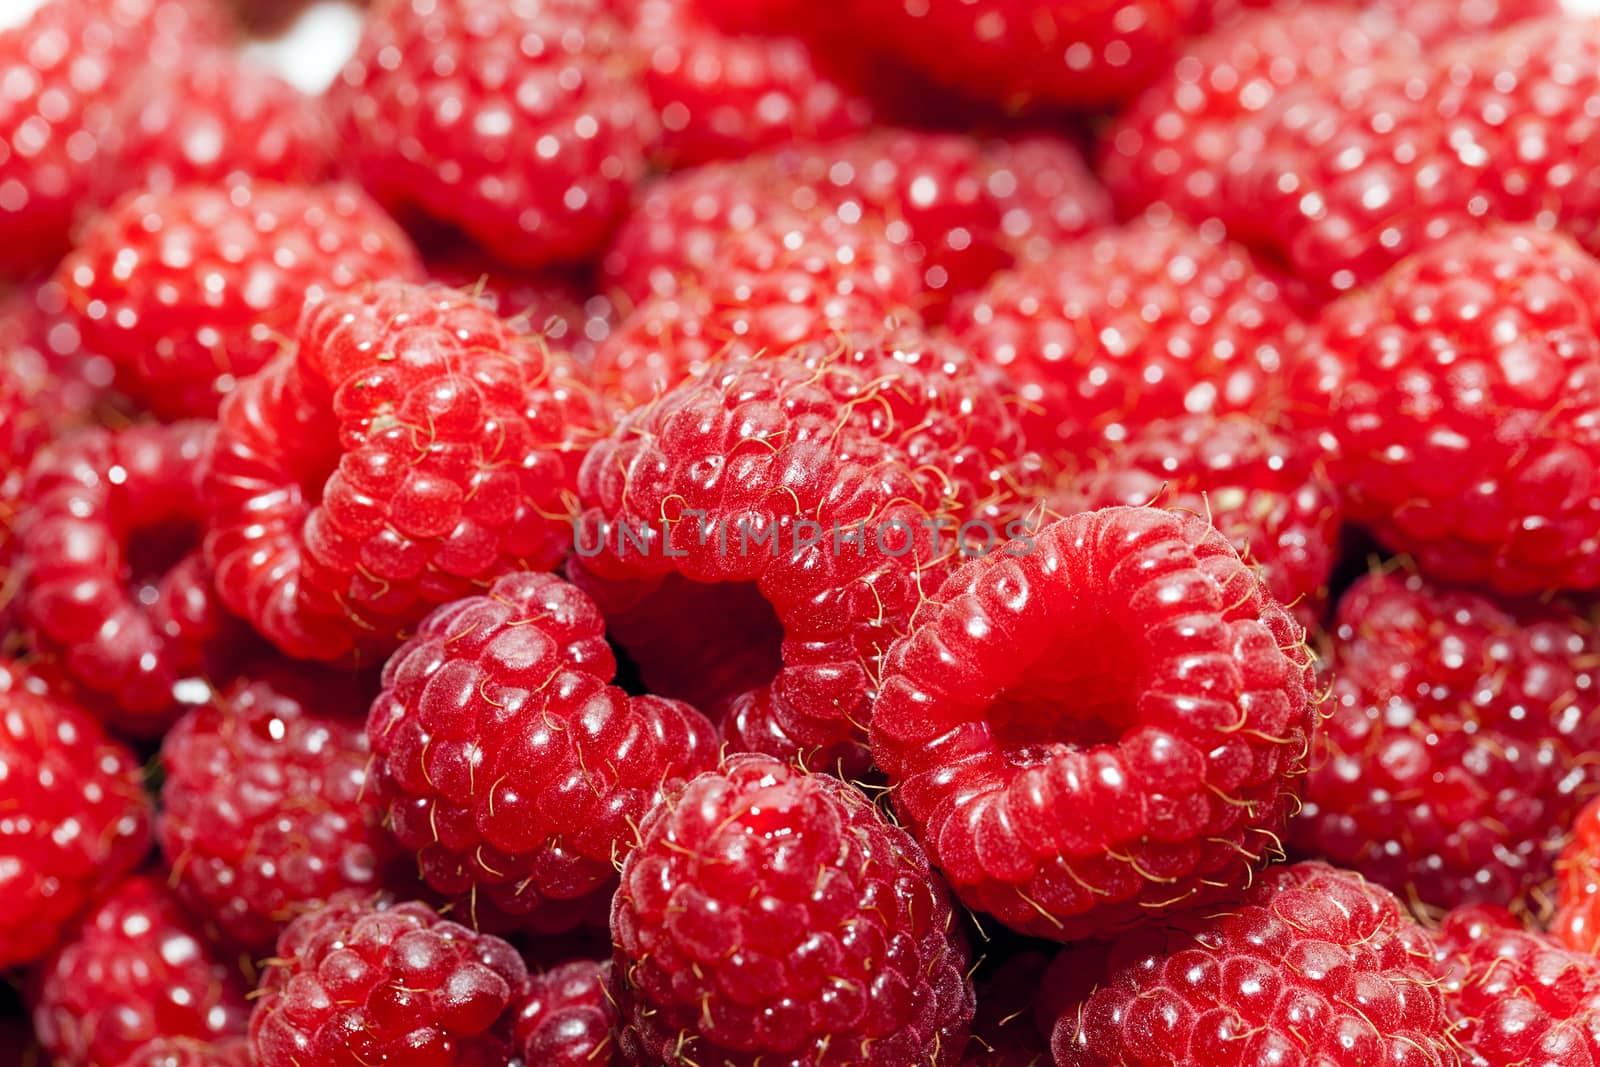   photographed close-up ripe red raspberries. background of raspberries